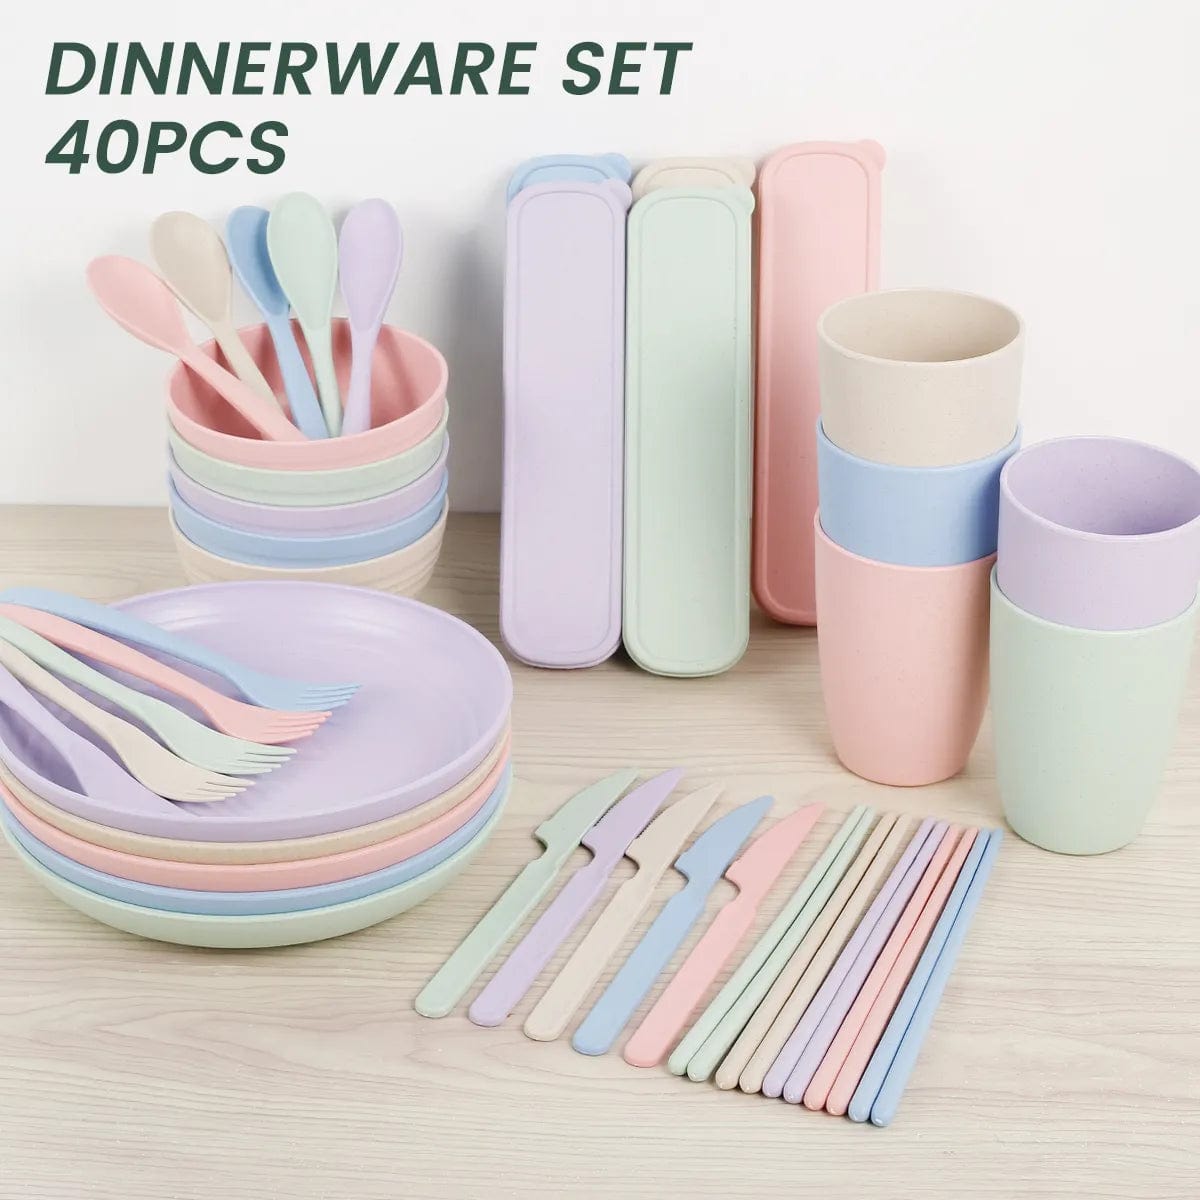 Organic camping tableware set 40 pieces made of wheat straw